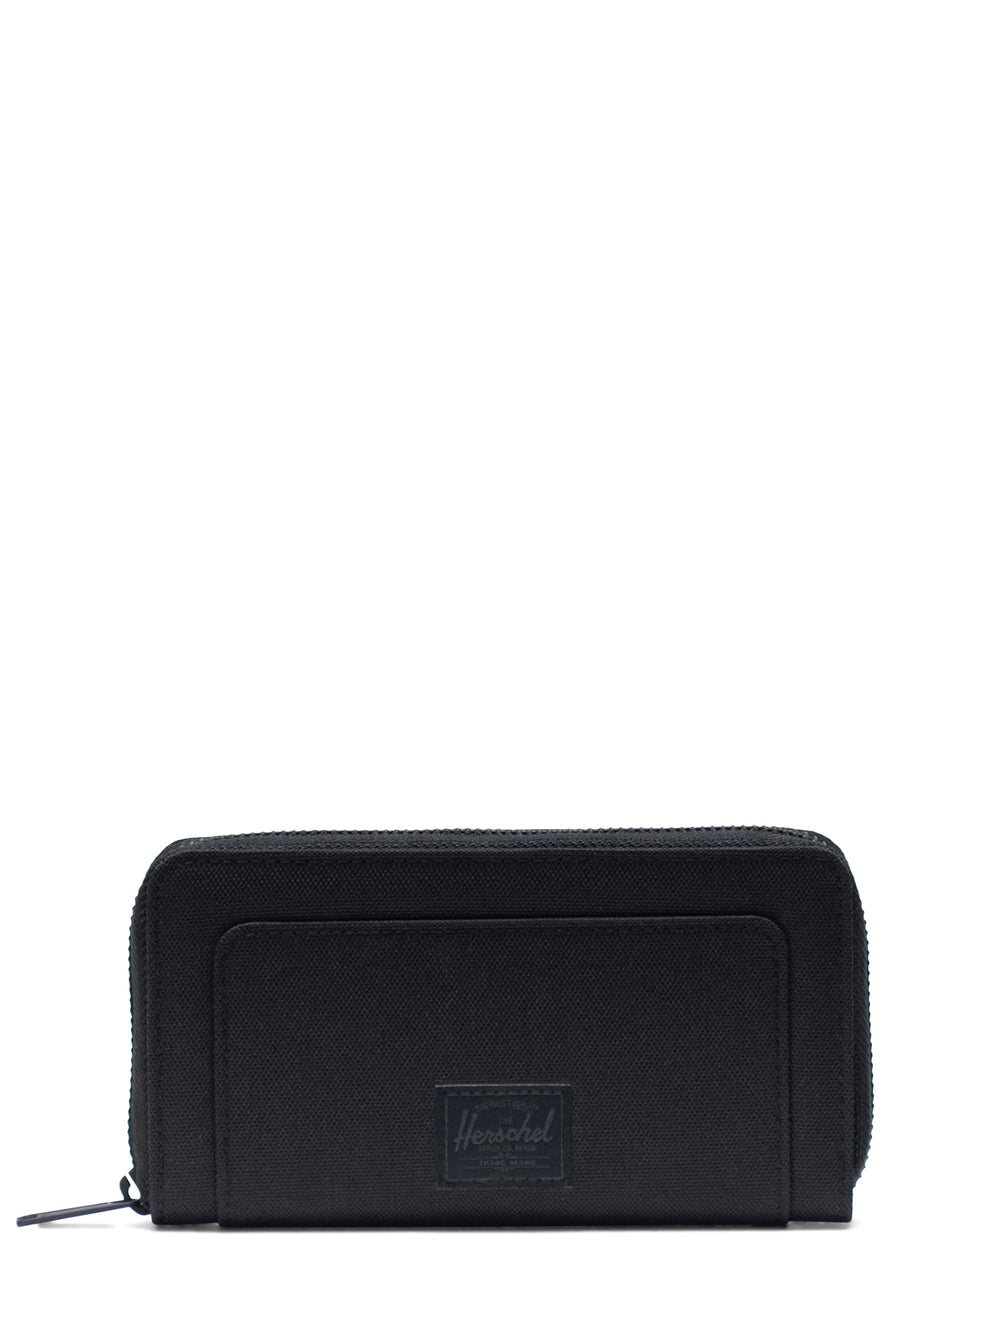 HERSCHEL SUPPLY CO. THOMAS RFID WALLET - CLEARANCE